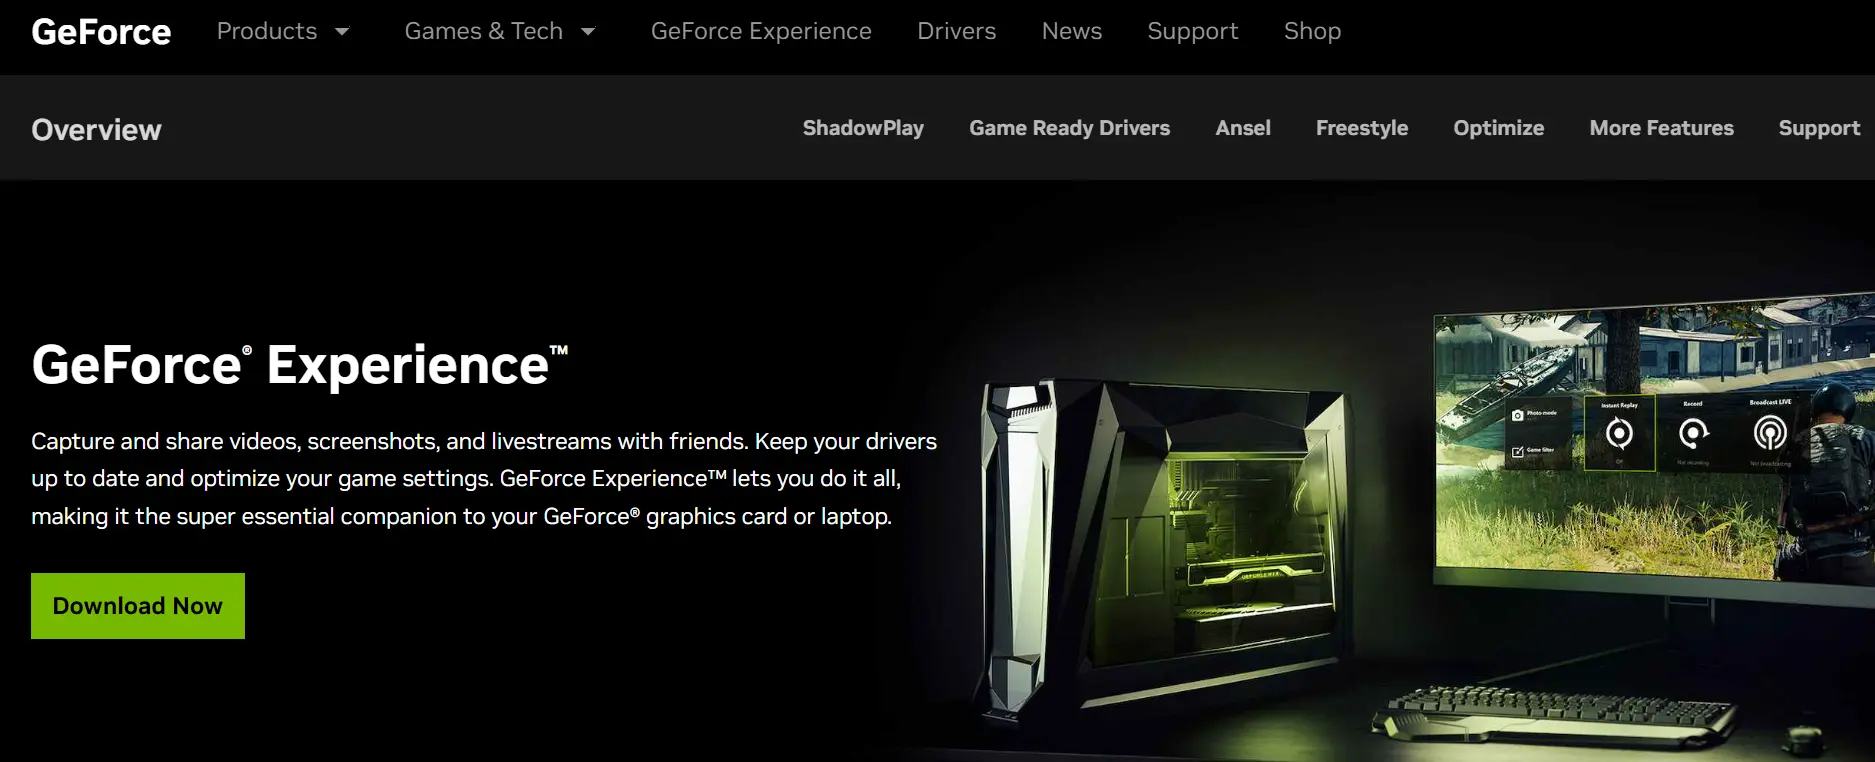 "Reinstall Nvidia GeForce Experience"